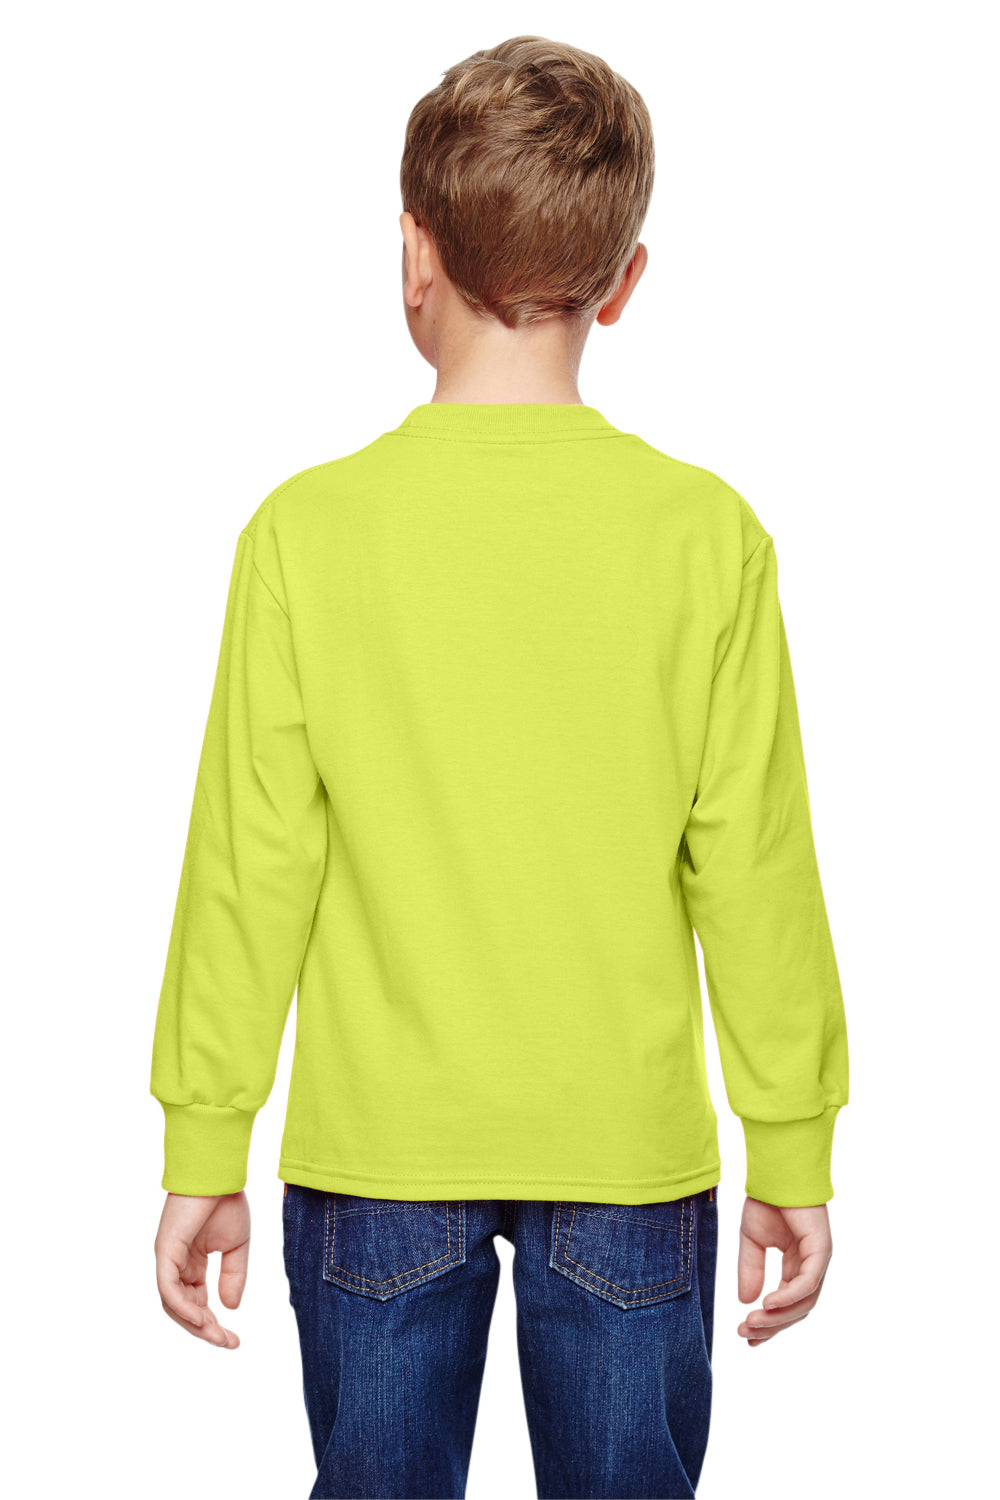 Fruit Of The Loom 4930B Youth HD Jersey Long Sleeve Crewneck T-Shirt Safety Green Back